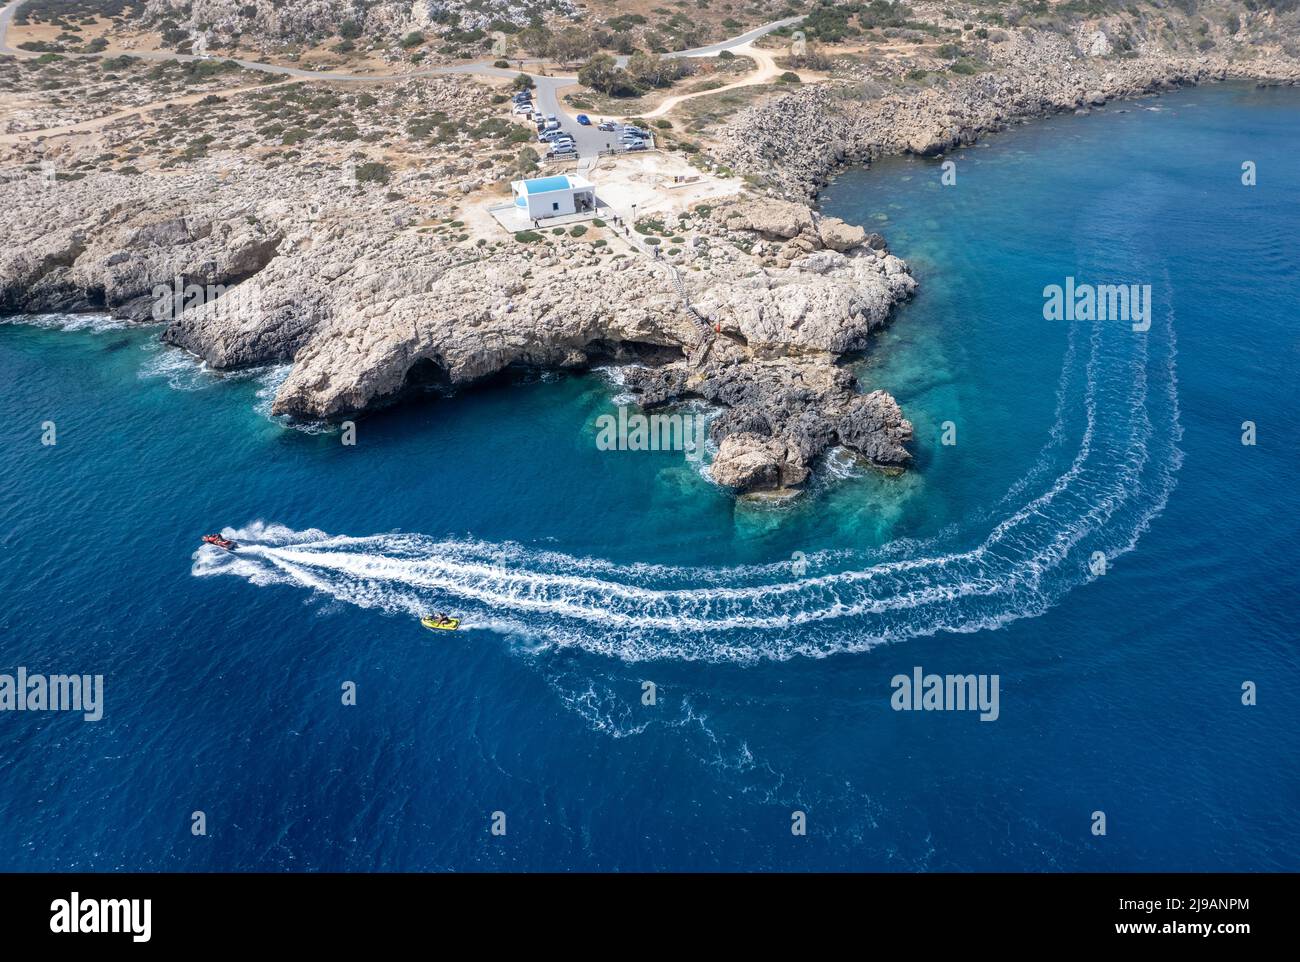 Aerial view of speed motor boat on open sea. Protaras Cape Greco Cypus Stock Photo